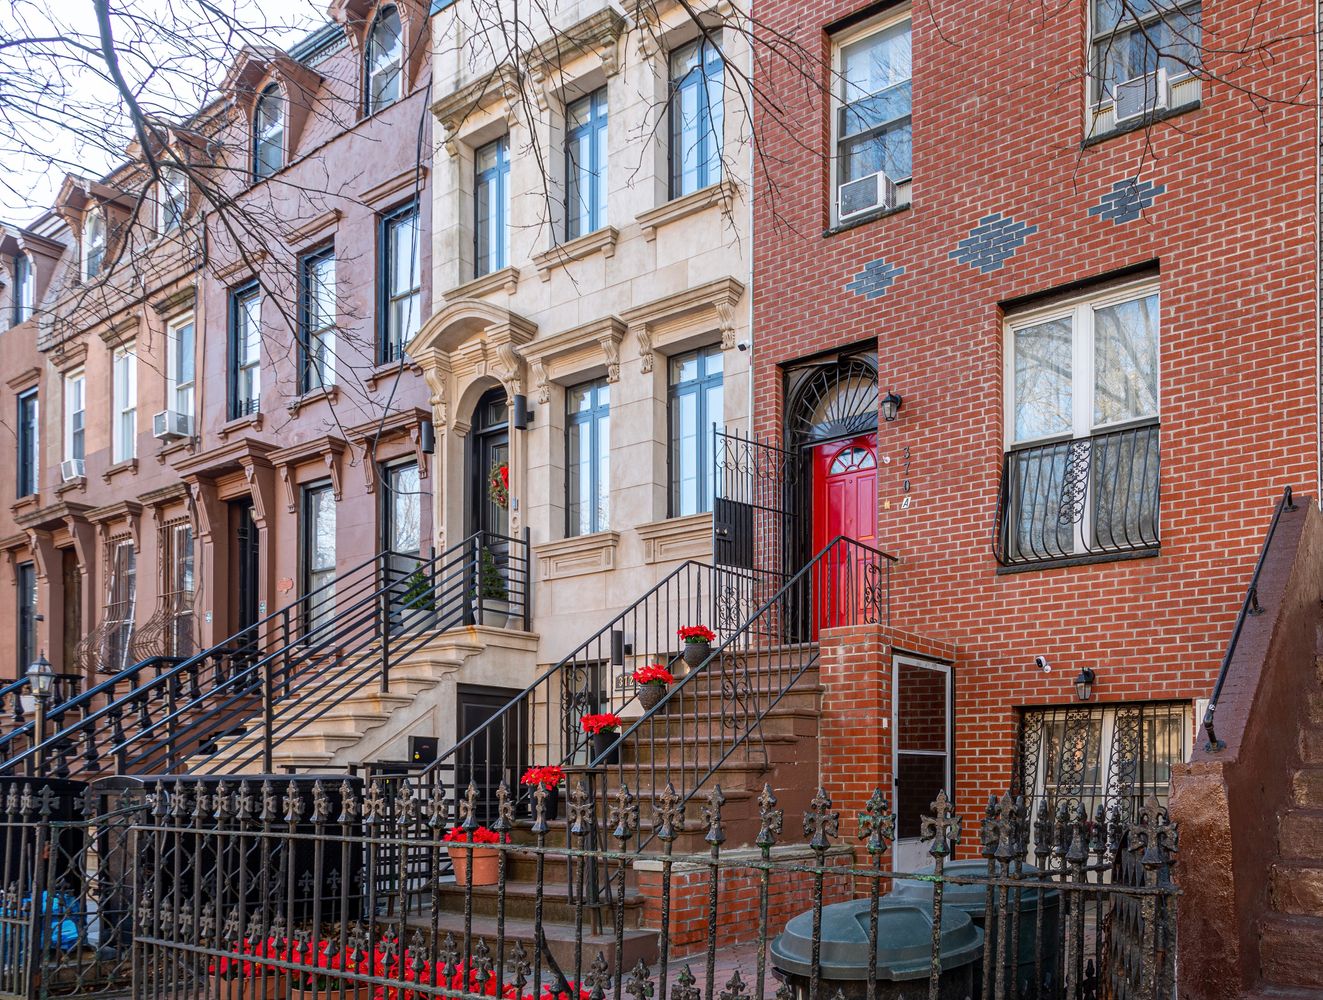 Apartments & Houses for Rent in Brooklyn, NY